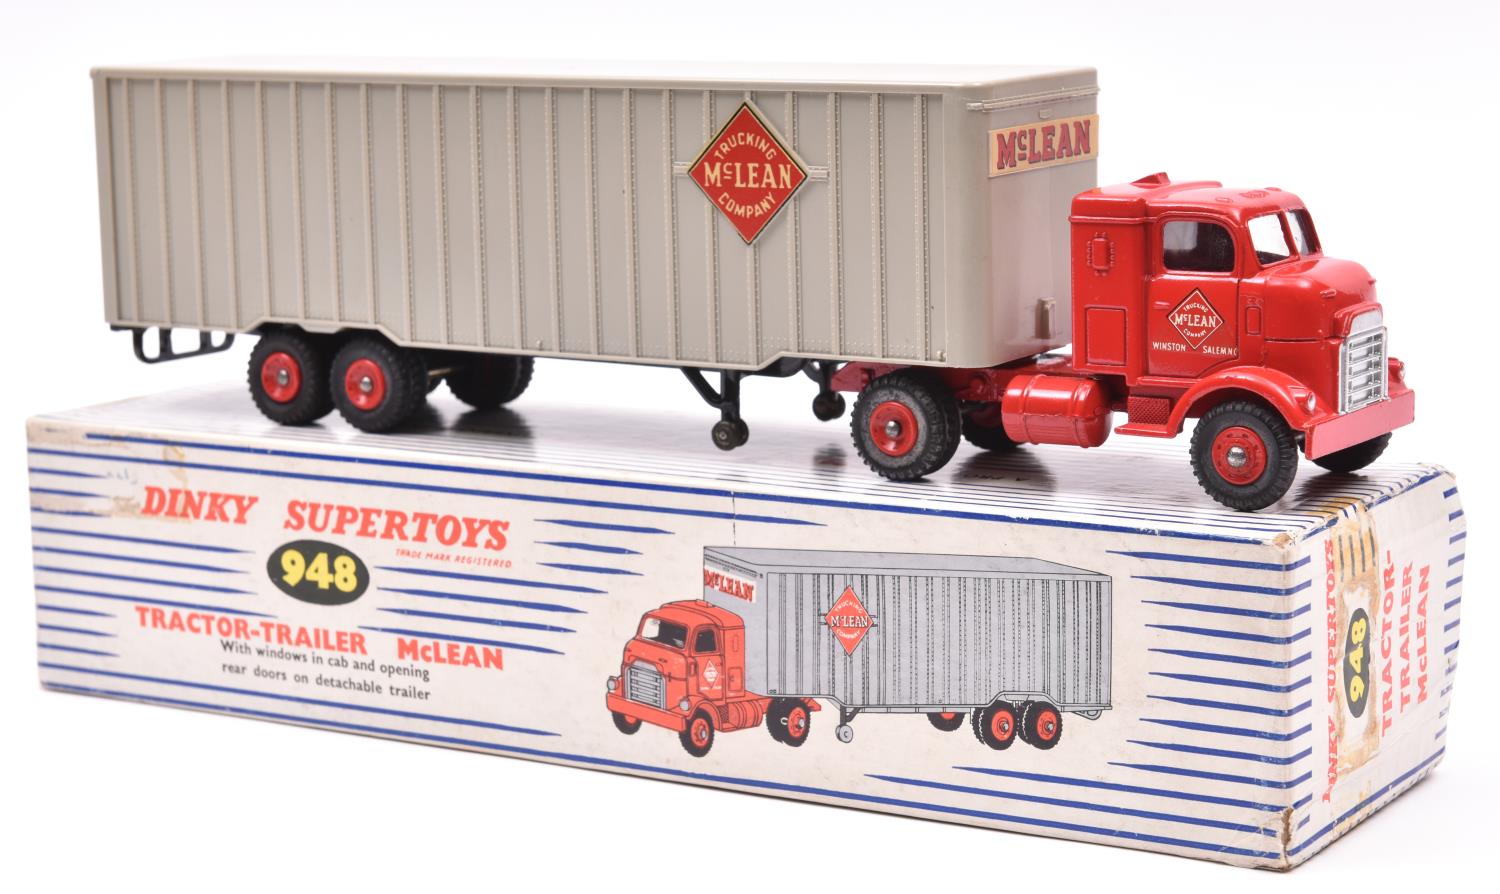 Dinky Supertoys Tractor-Trailer McLean (948). In red and grey 'McLean Trucking Company' livery, with